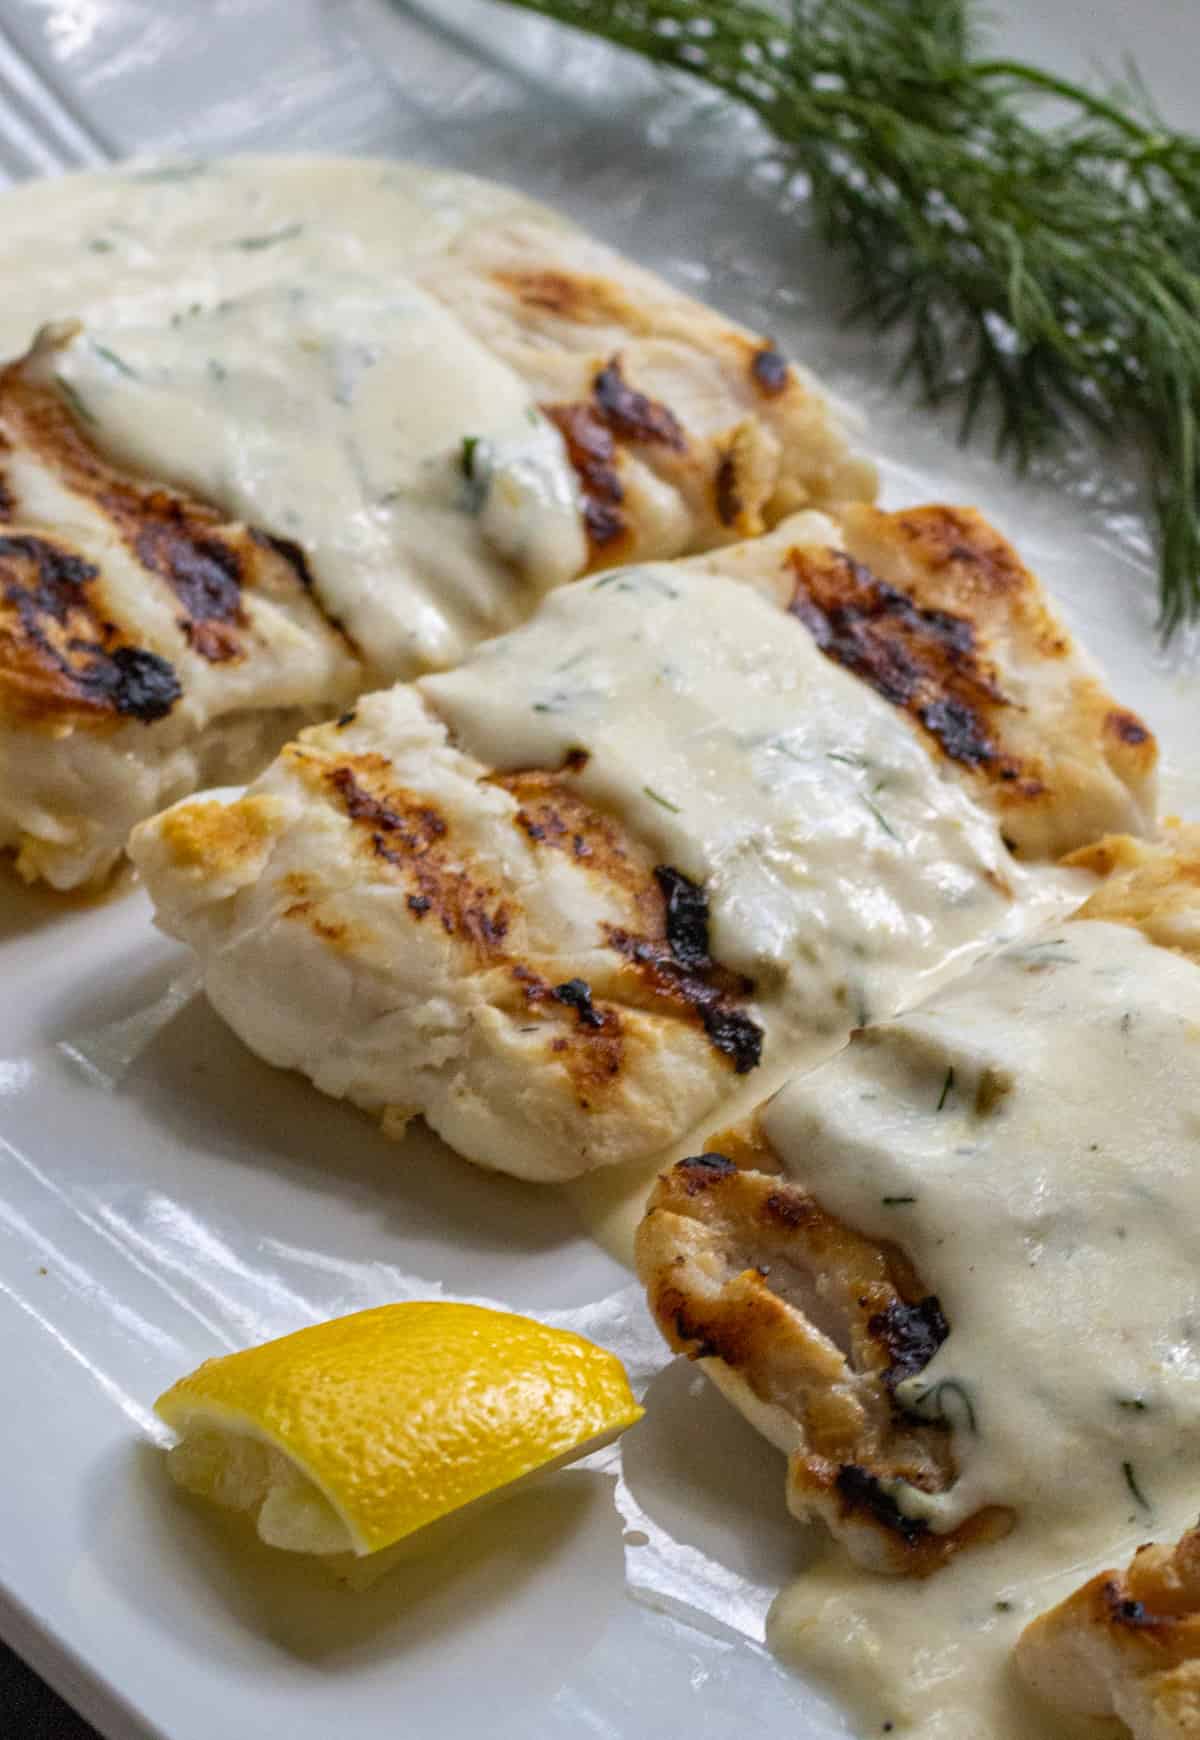 Up close shot of a haddock filet topped with lemon dill cream sauce.